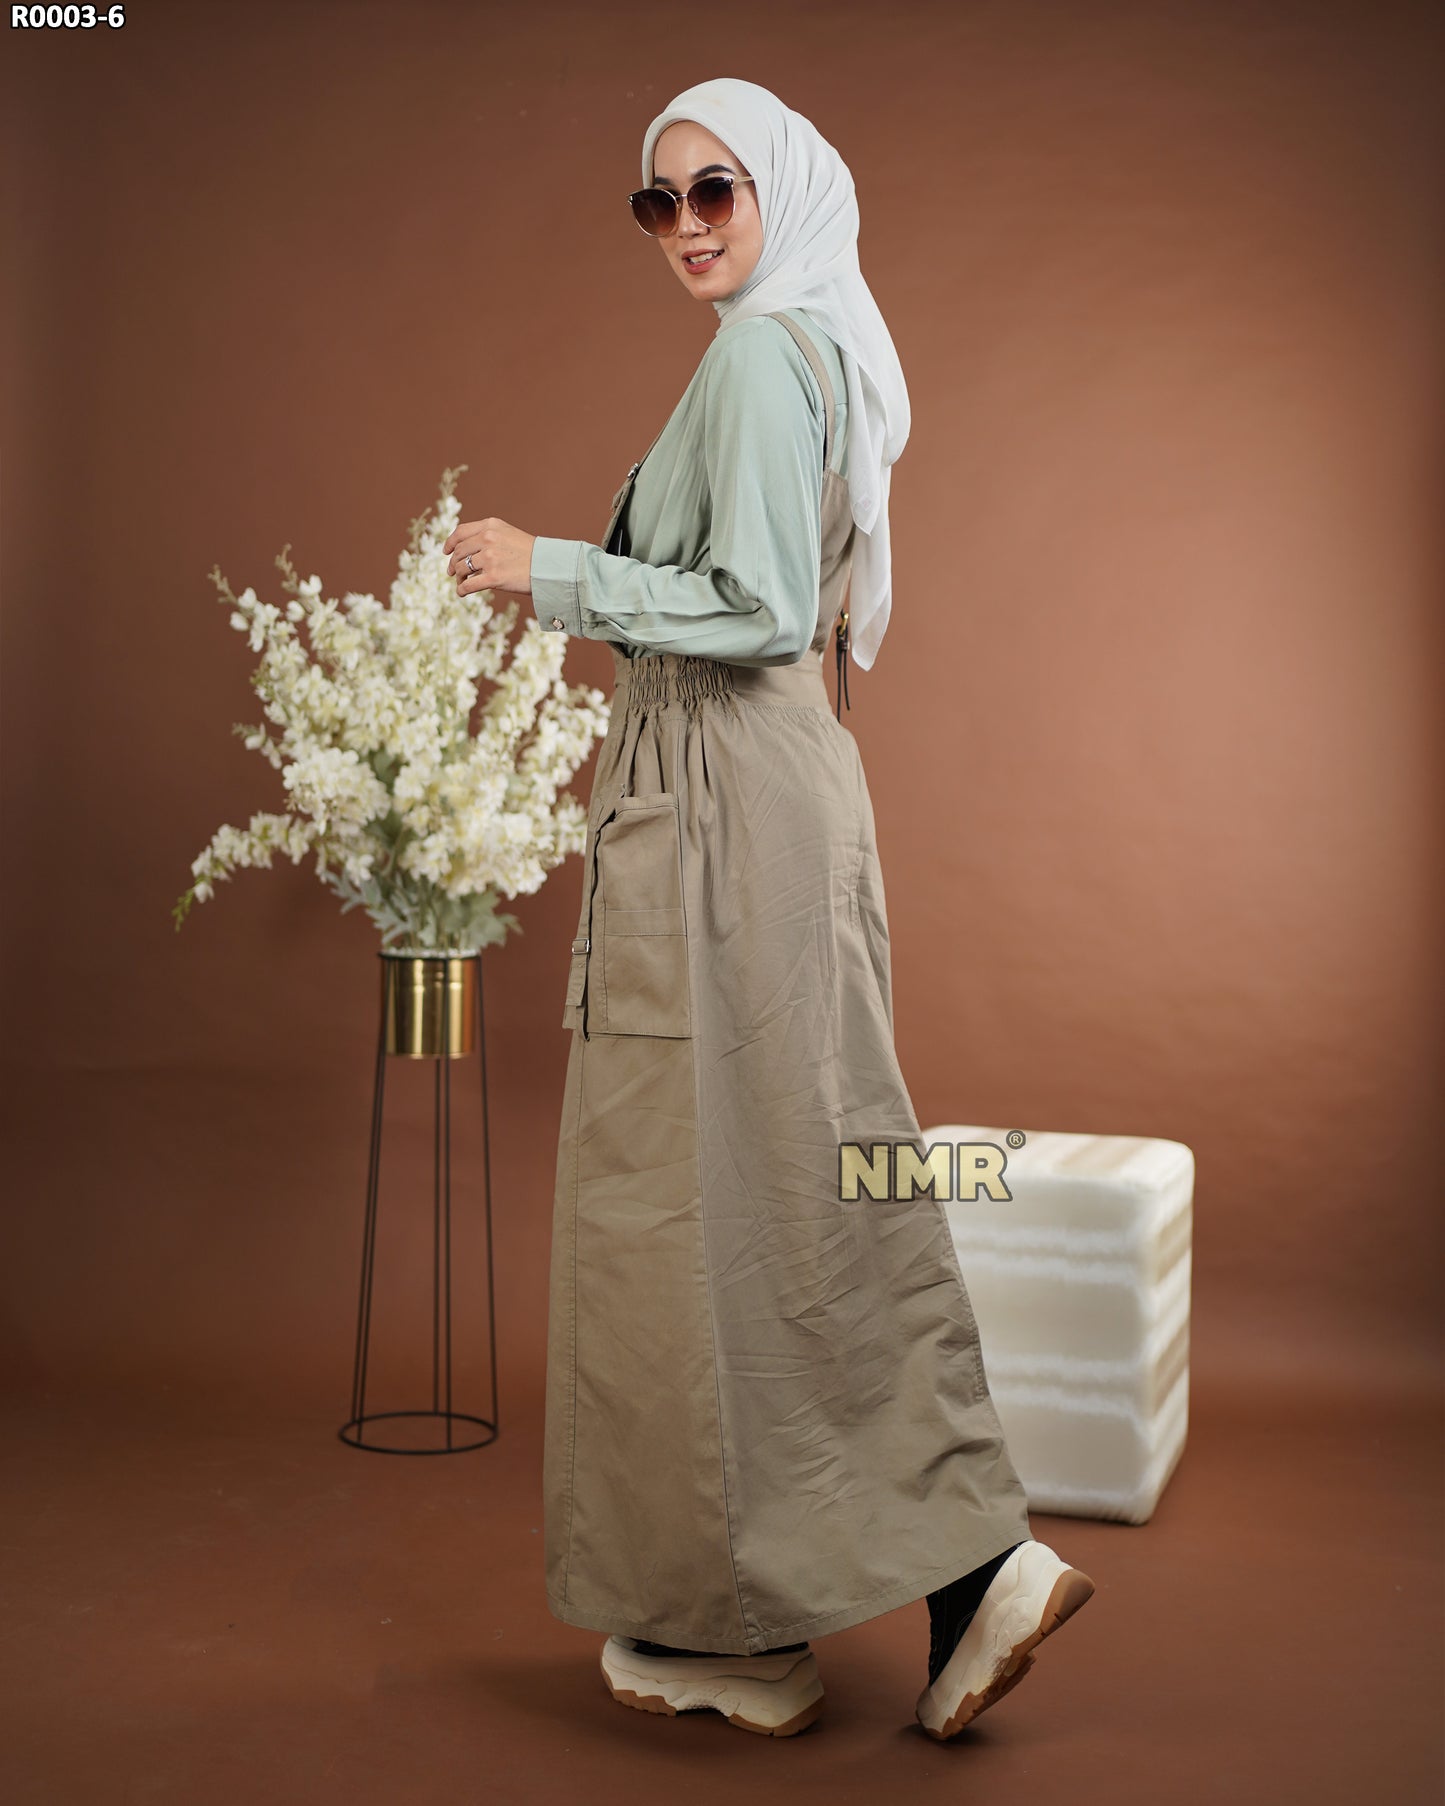 NMR Gamis Jumpsuit Overall Baby Canvas Vol R003-6